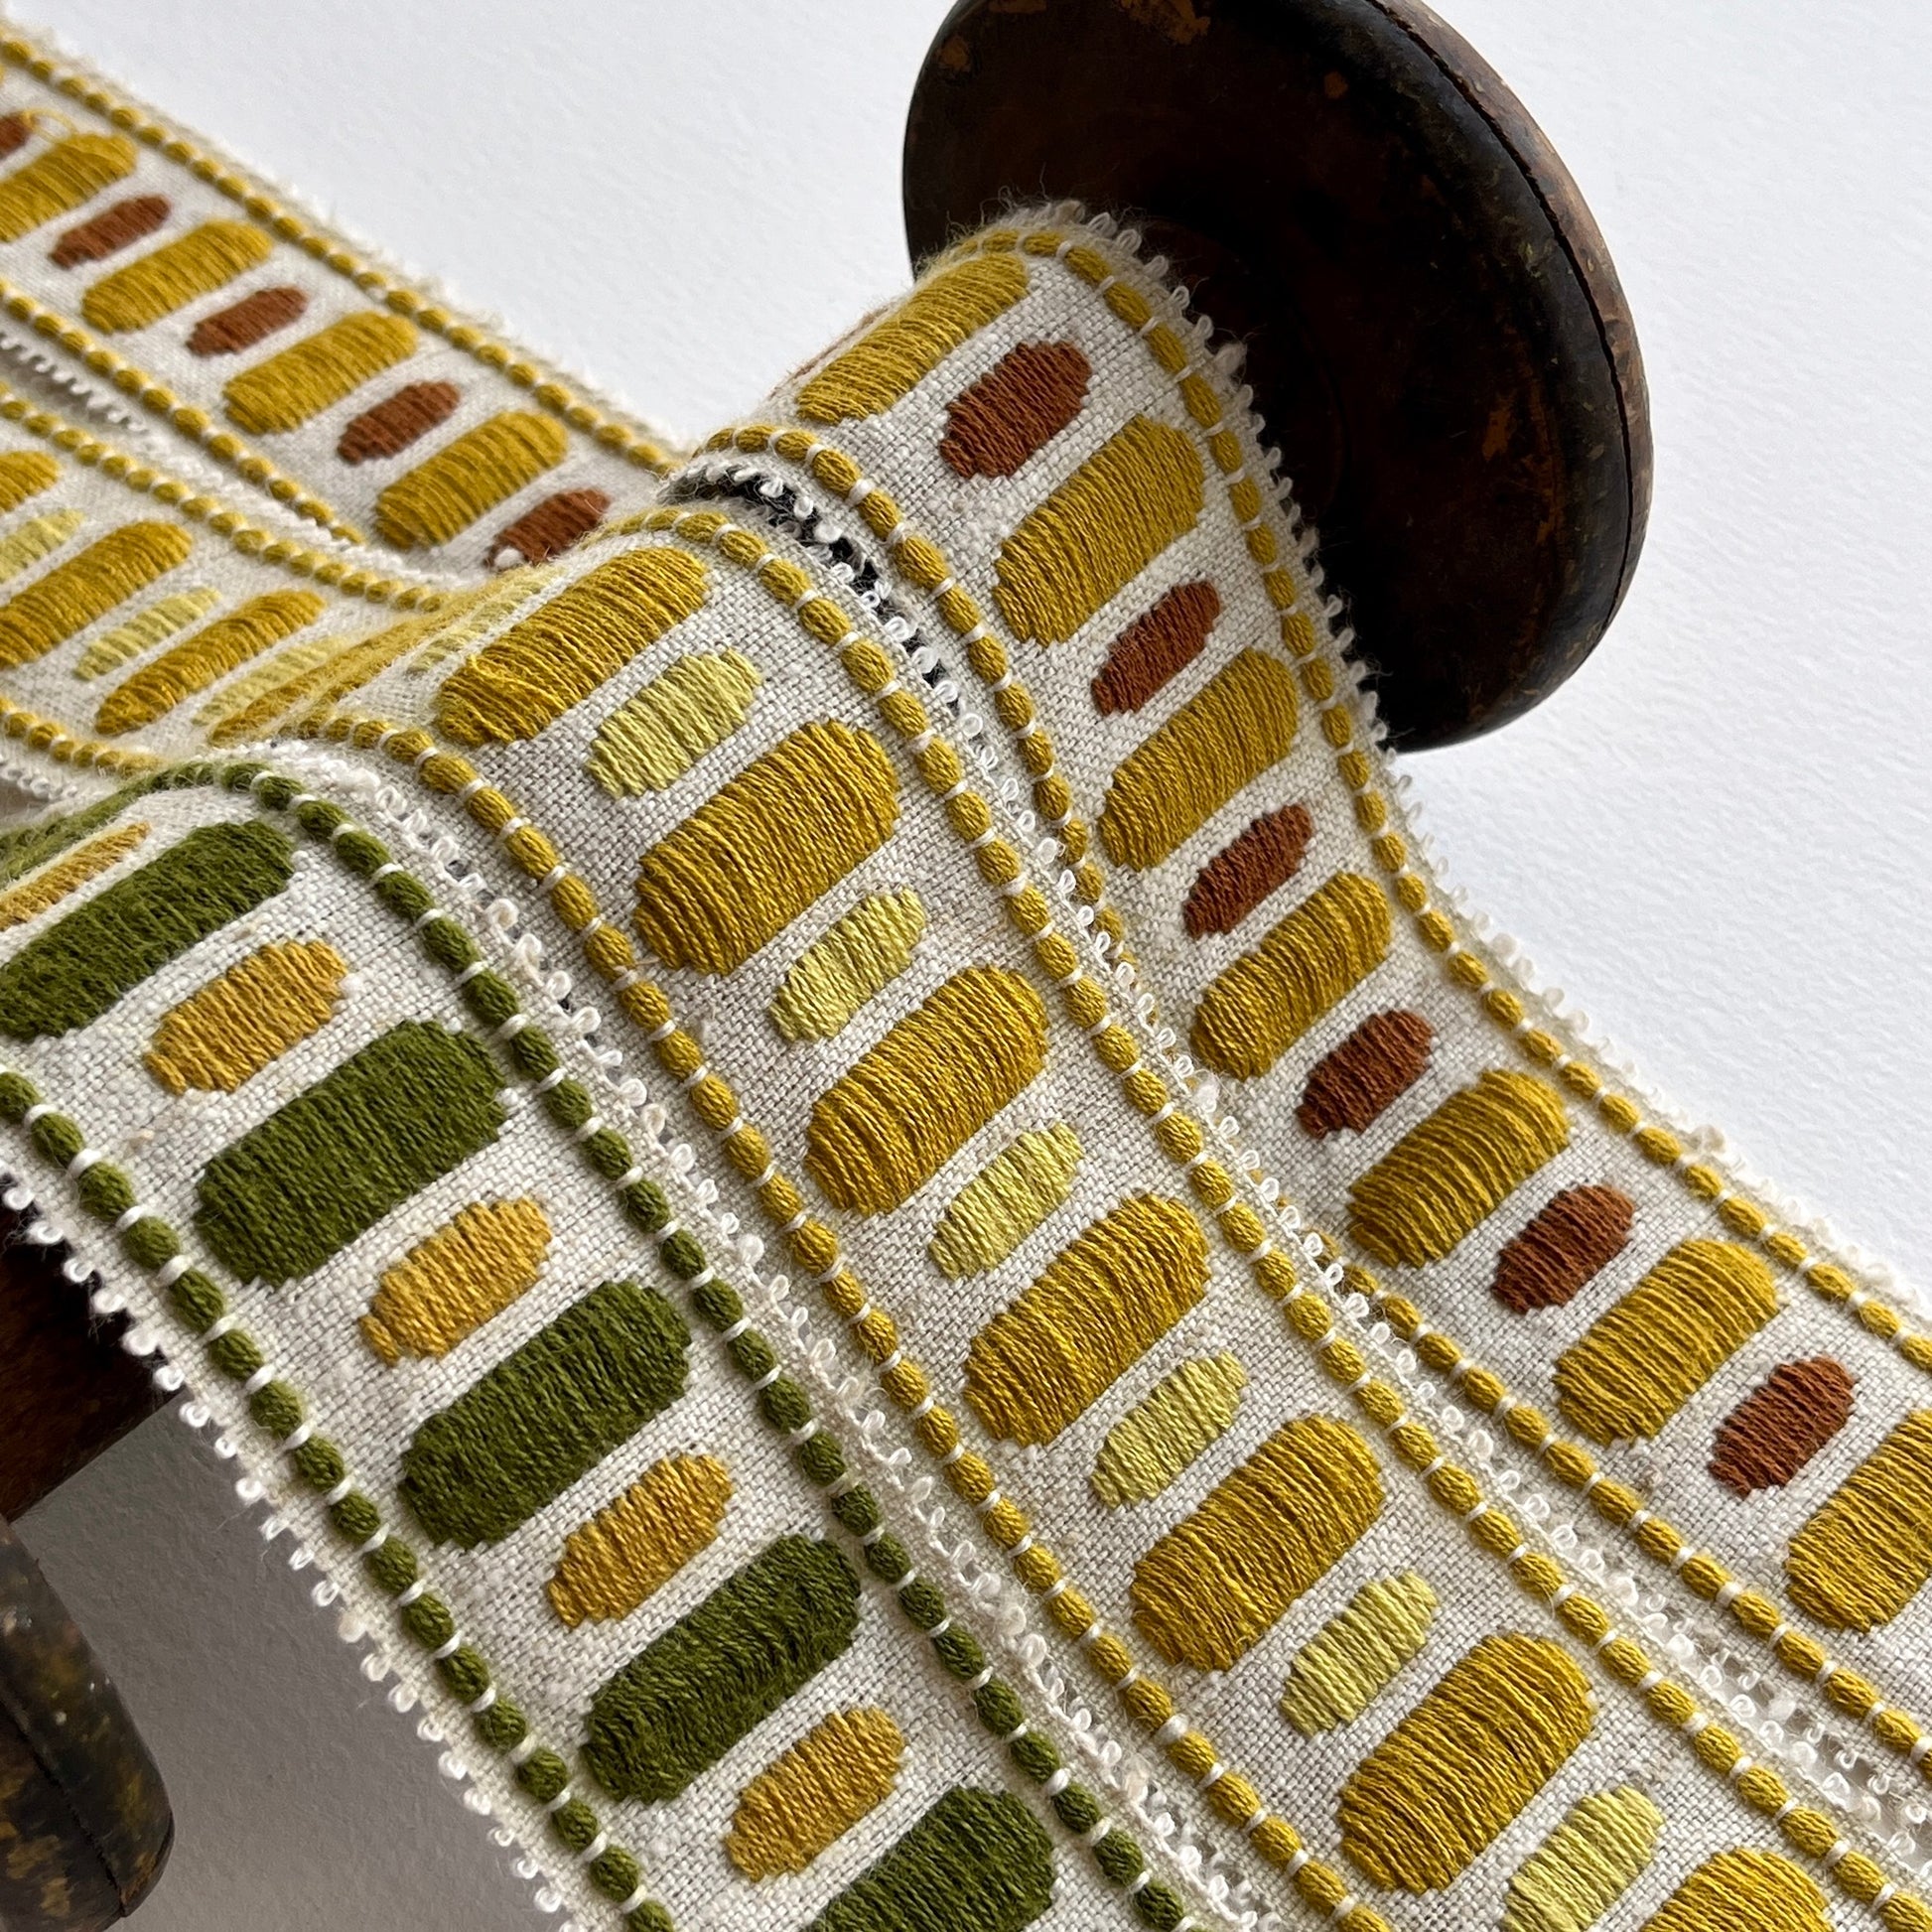 Vintage, retro upholstery trim in made by Dralon - Bayer Fibre textile, manufactured in the 1970s.